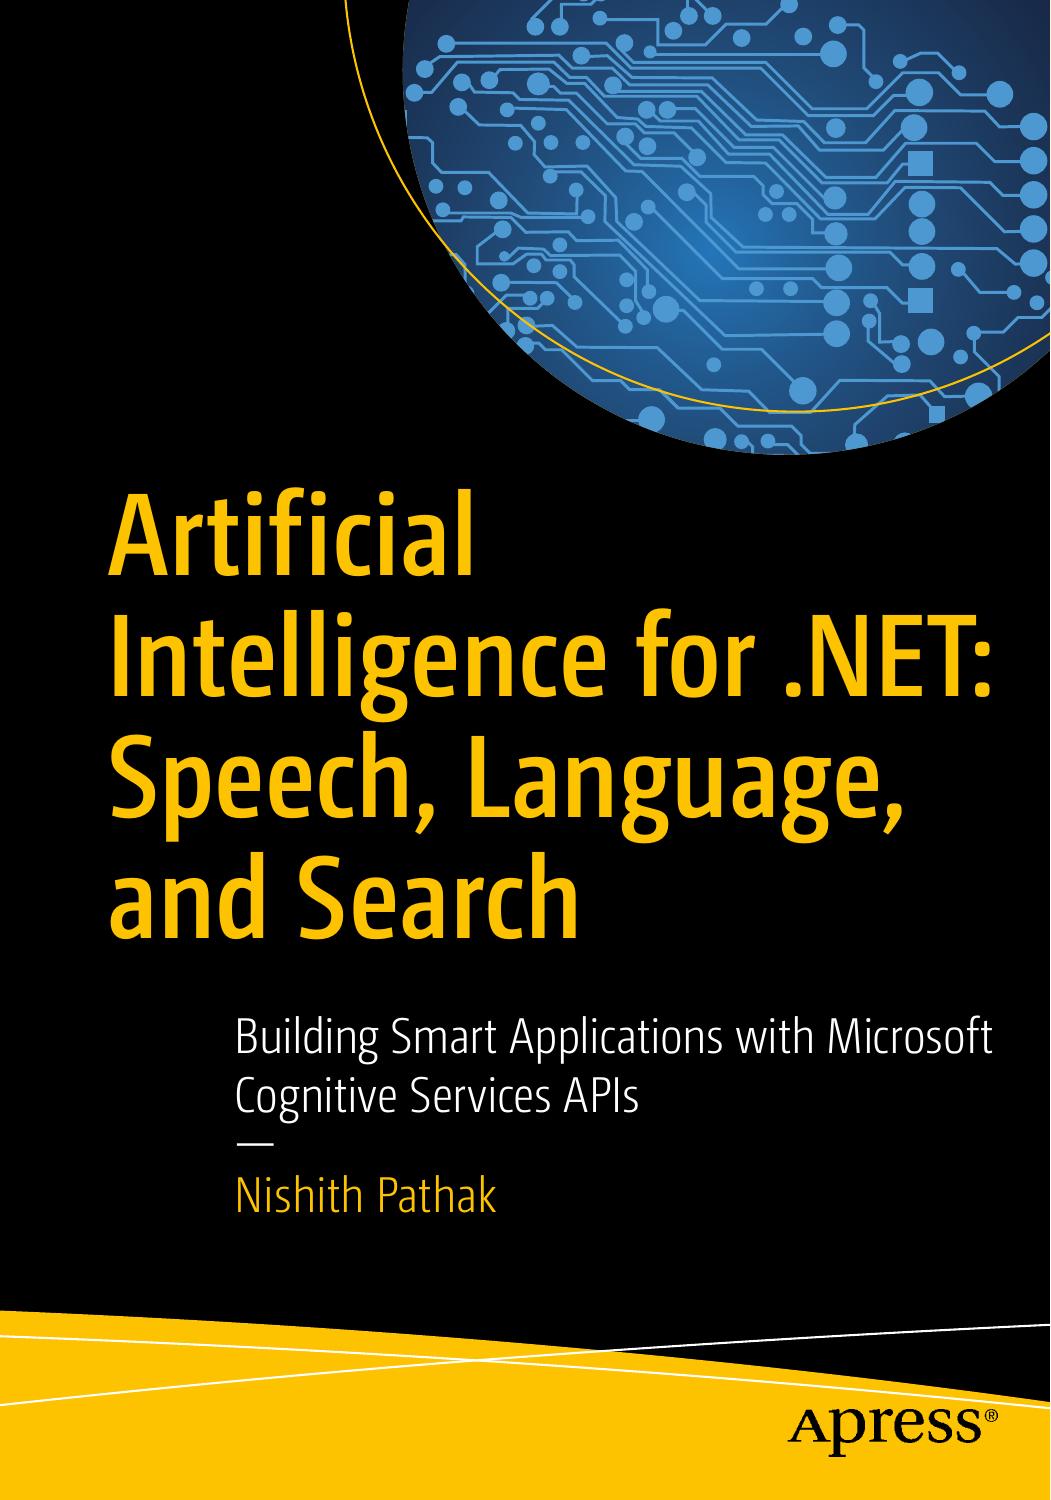 Artificial Intelligence for .NET: Speech, Language, and Search: Building Smart Applications With Microsoft Cognitive Services APIs